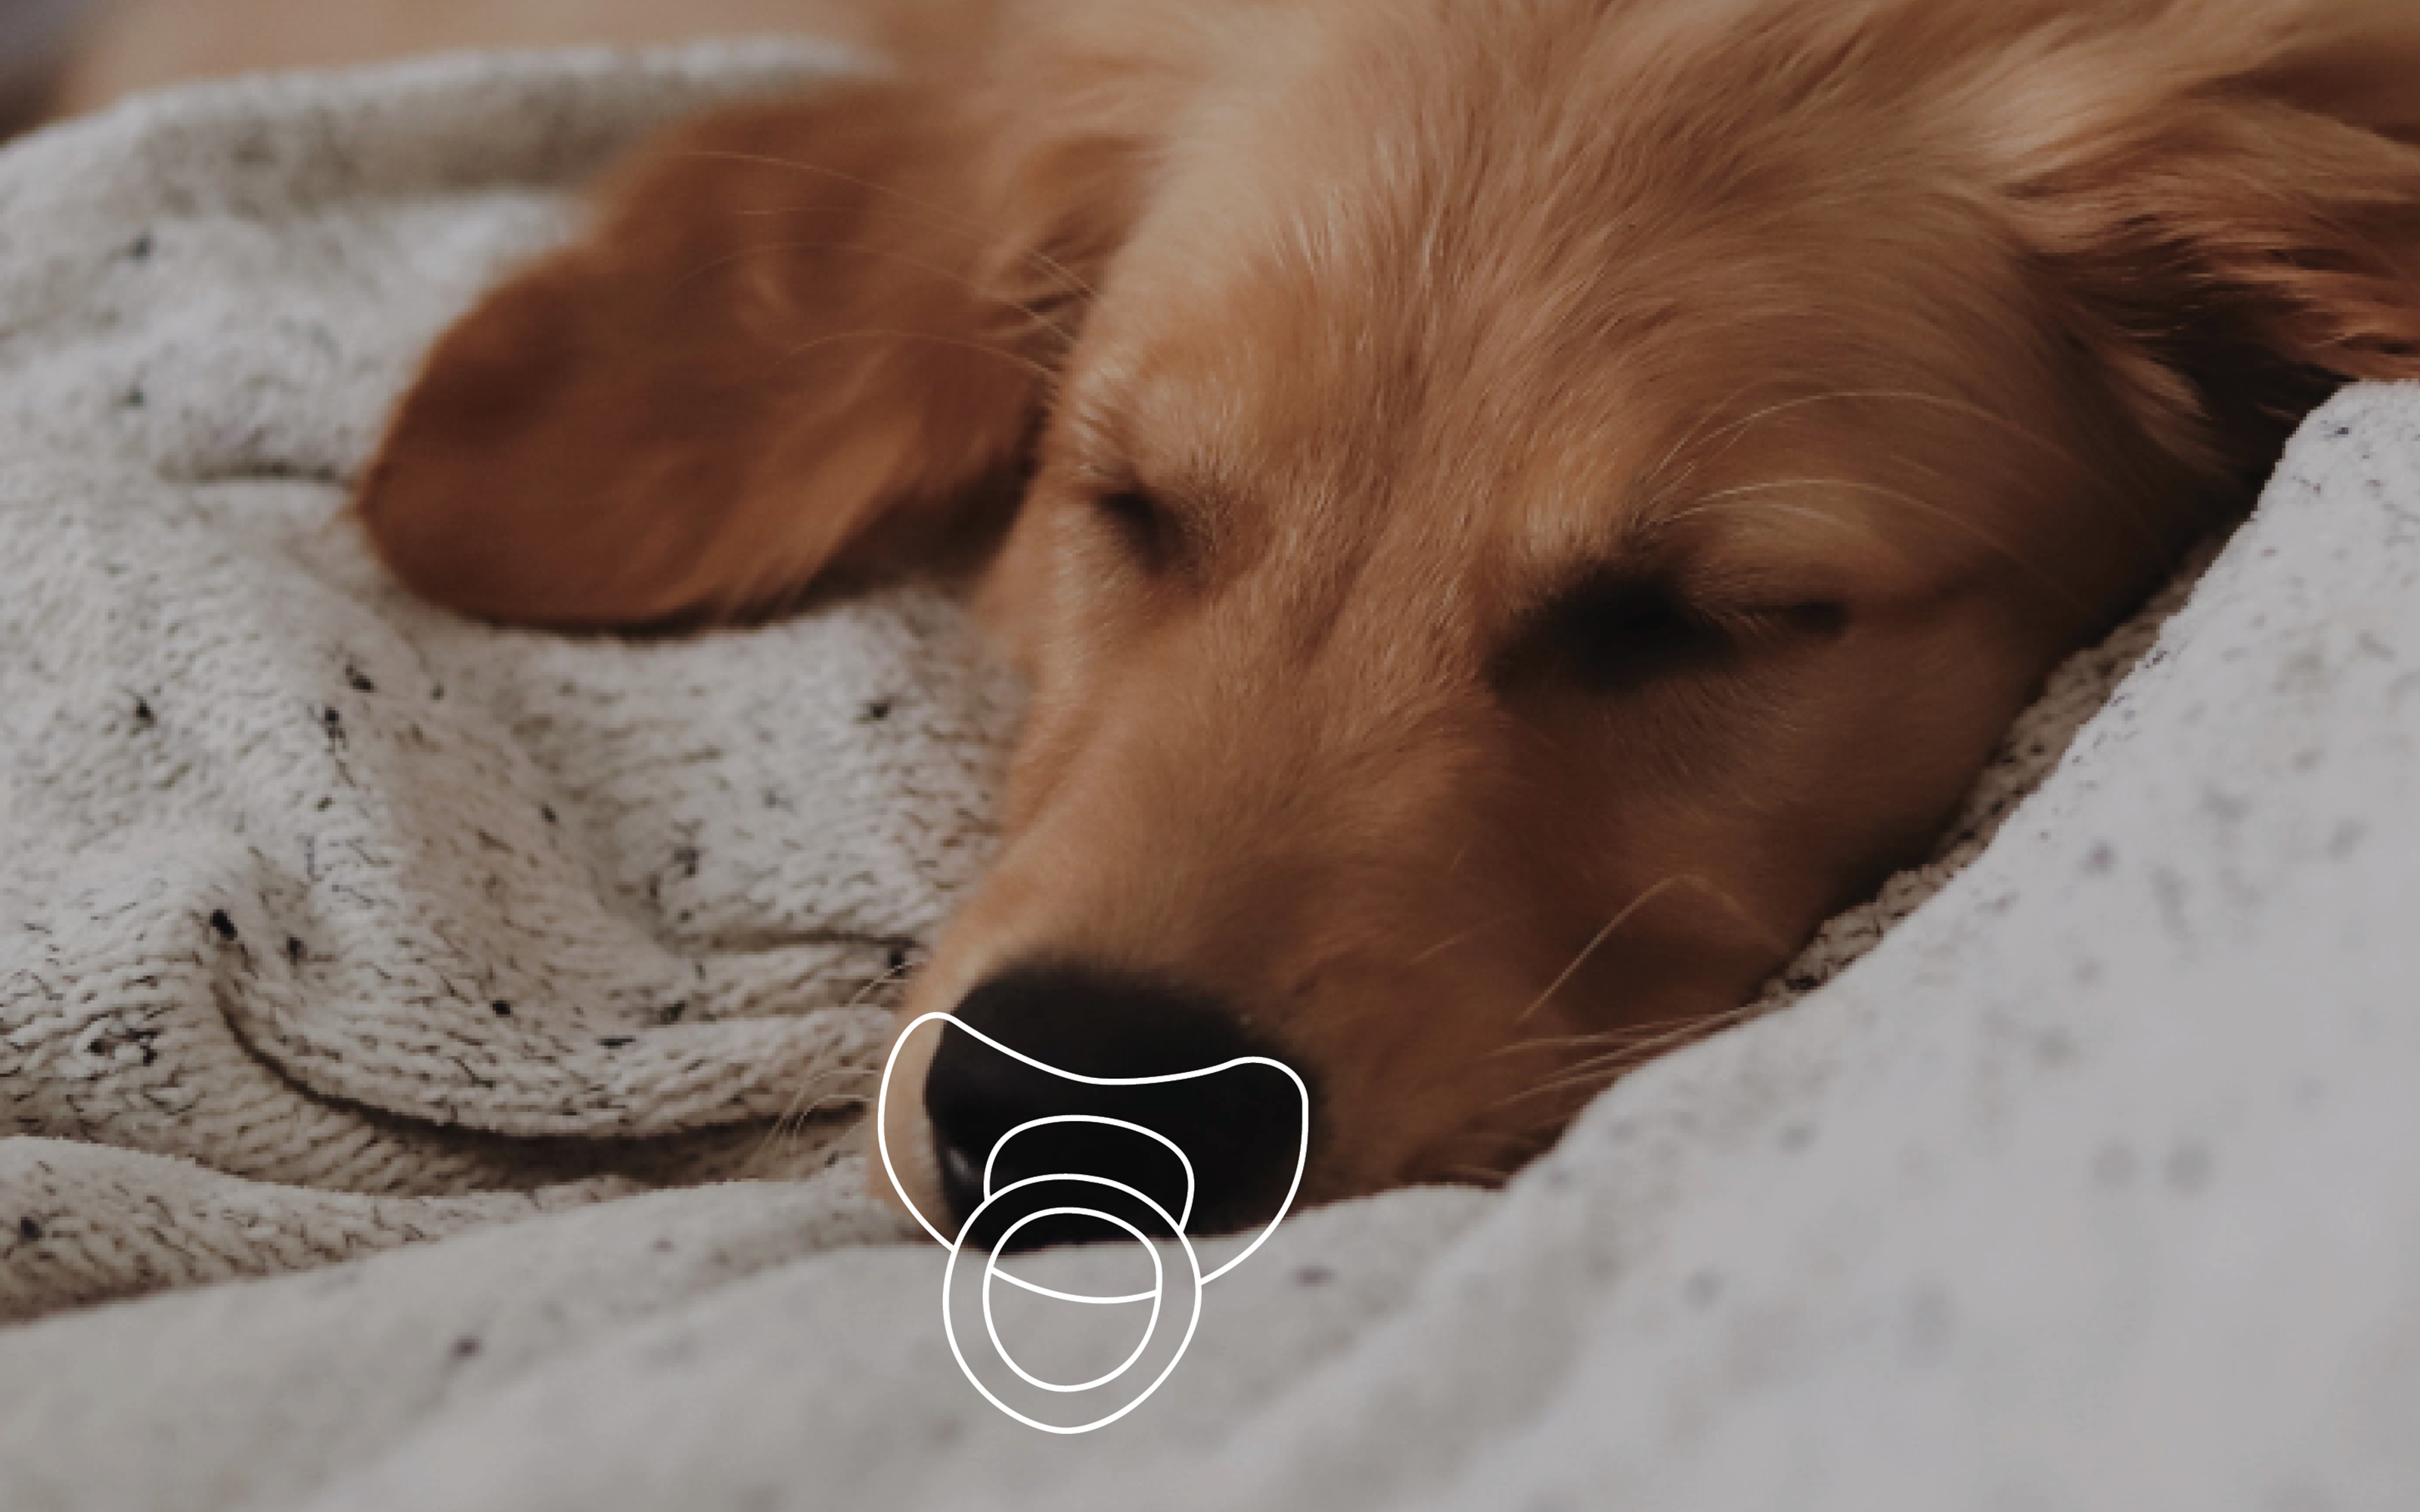 Photo of a puppy sleeping with an illustrated pacifier in its mouth.